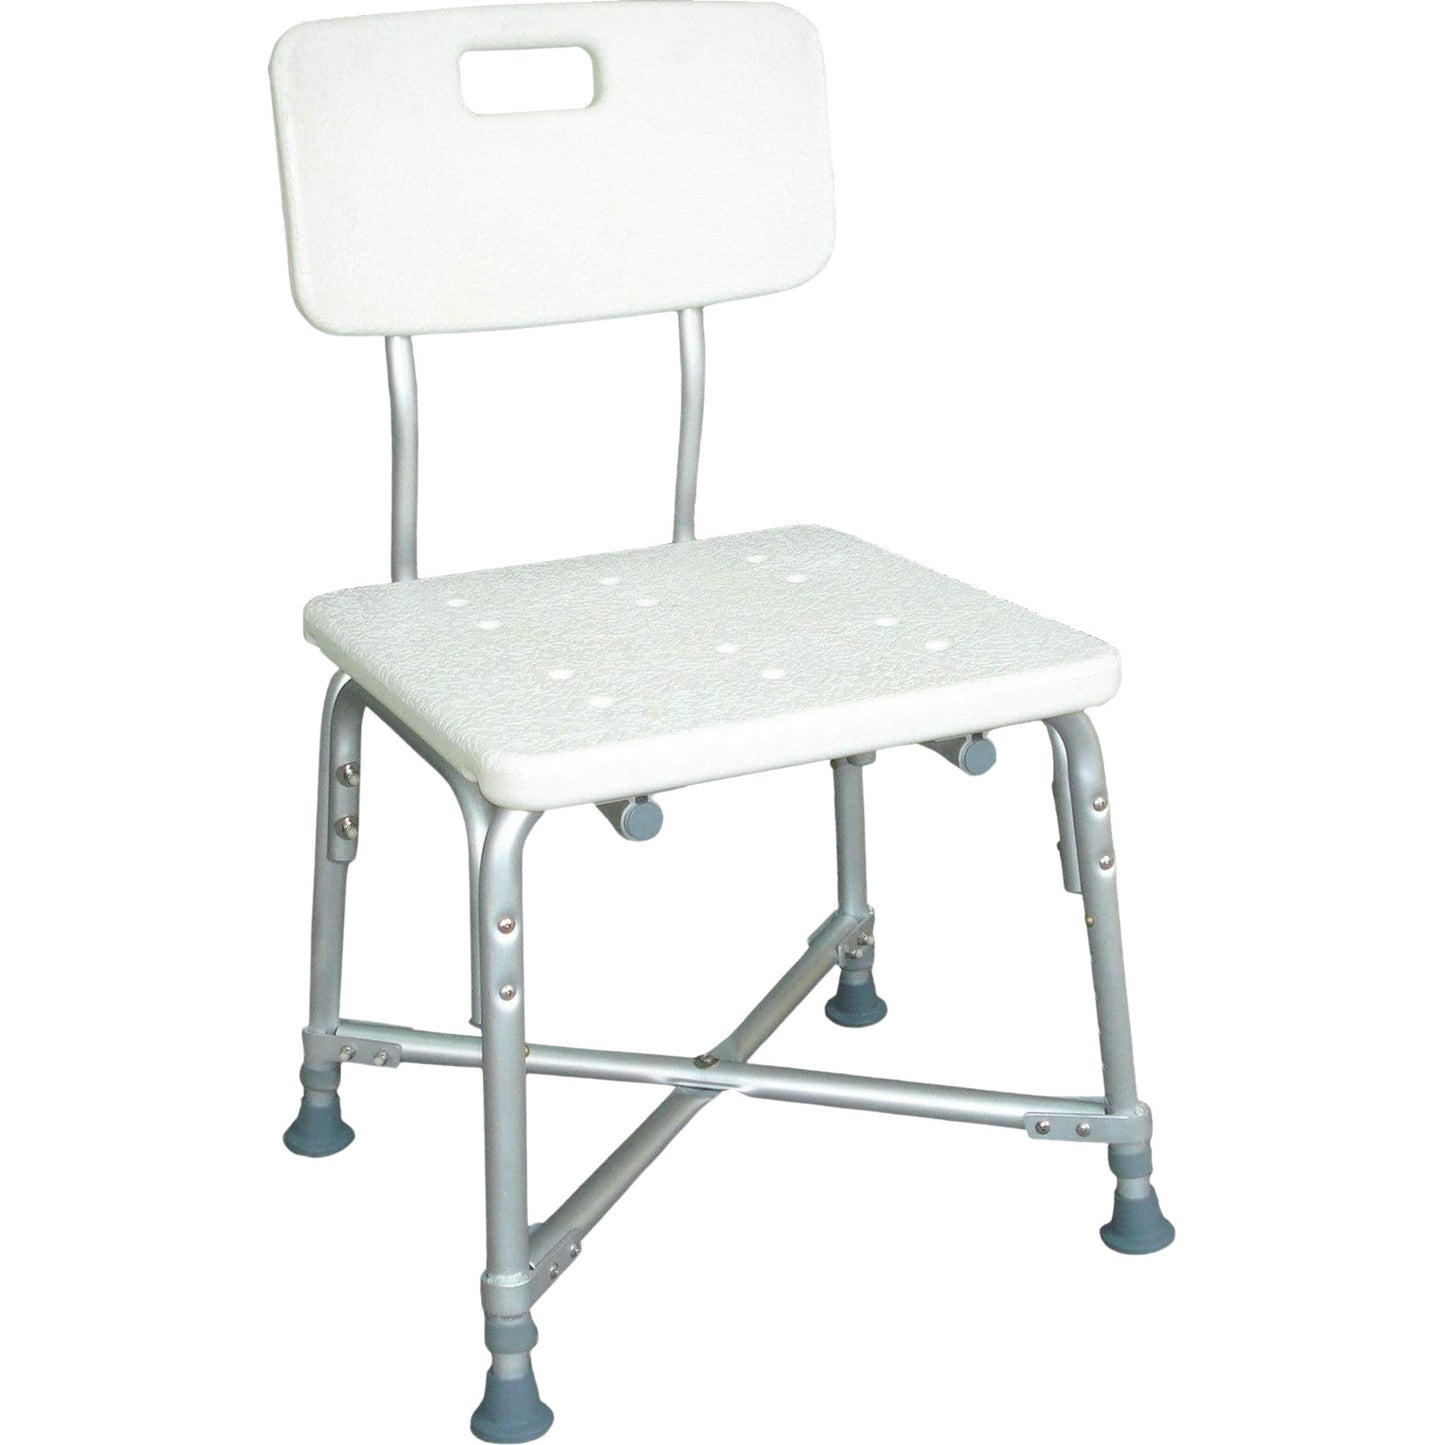 ConvaQuip Shower Stools Bariatric Shower Stool with Back Model DR12029 by ConvaQuip